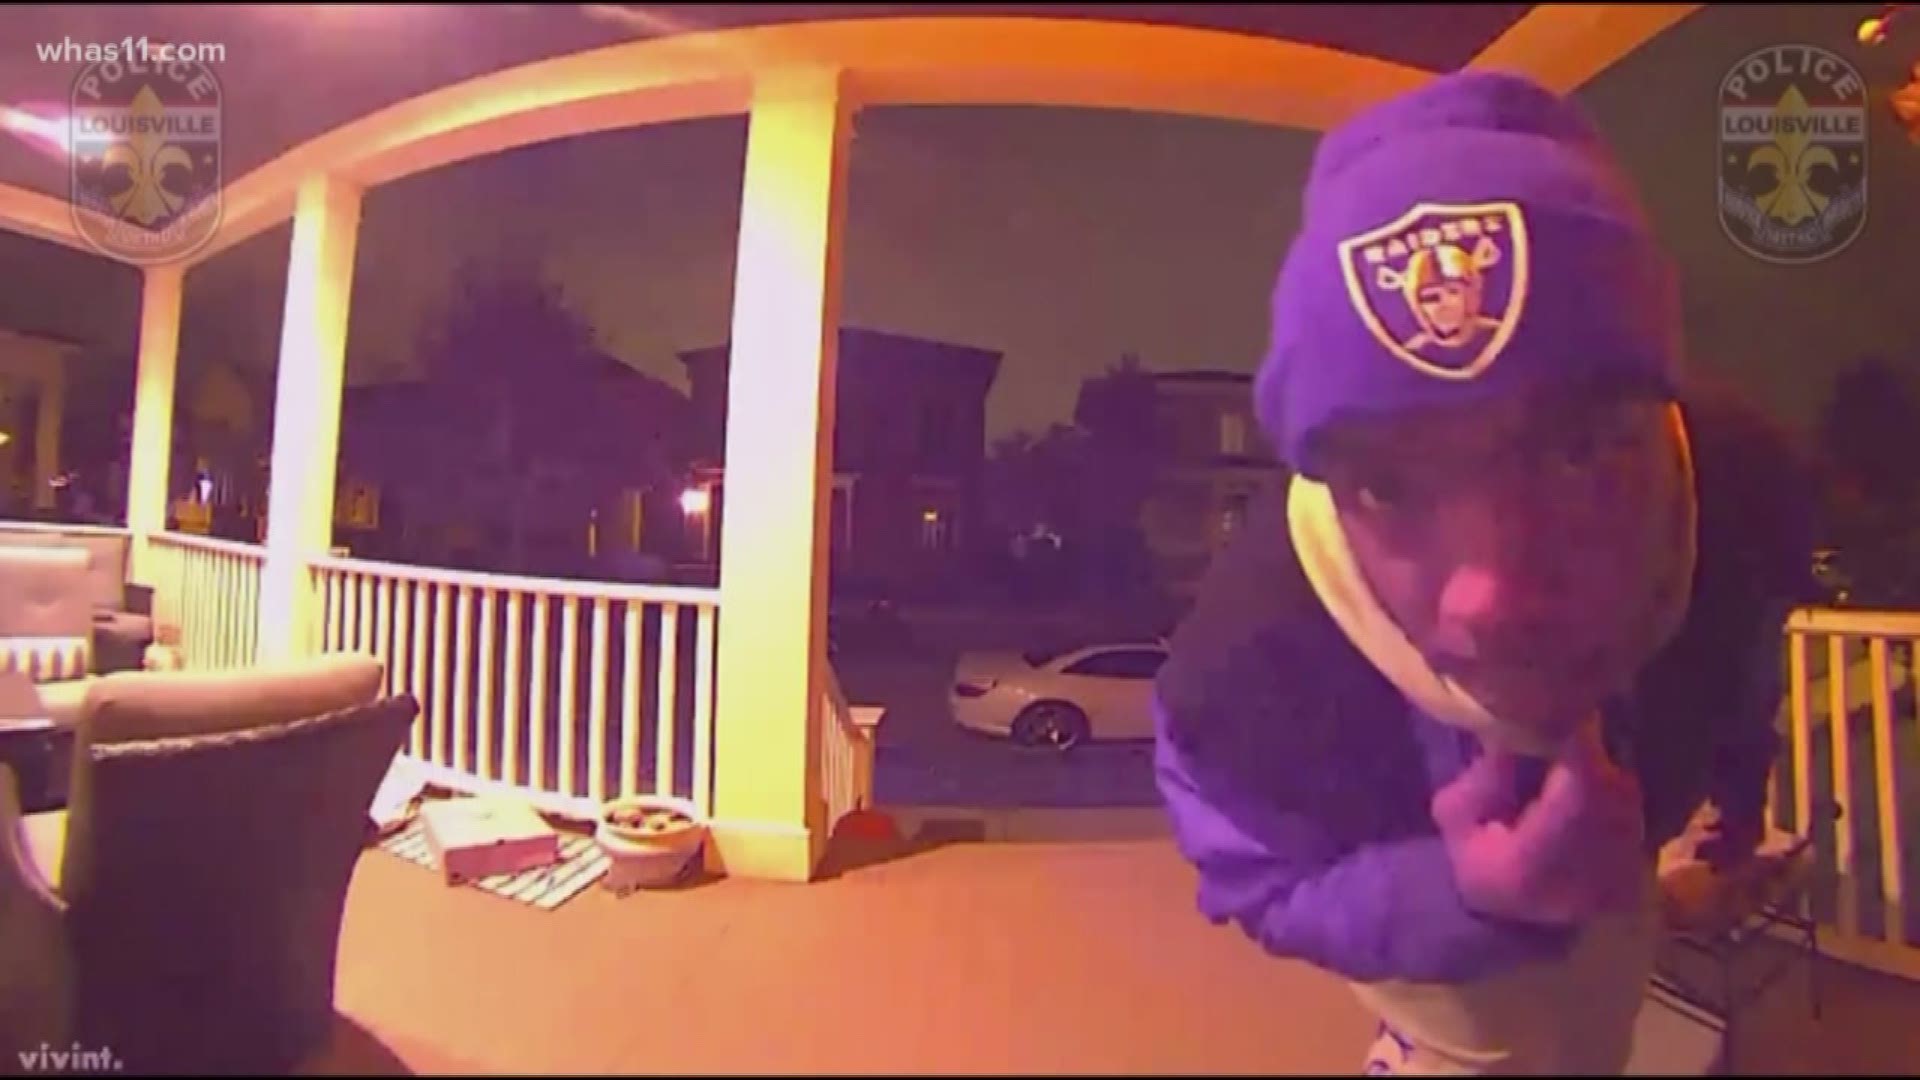 A porch package bandit caught in the act in the Norton Commons area trying doorknobs to see if anyone is home and then taking packages.